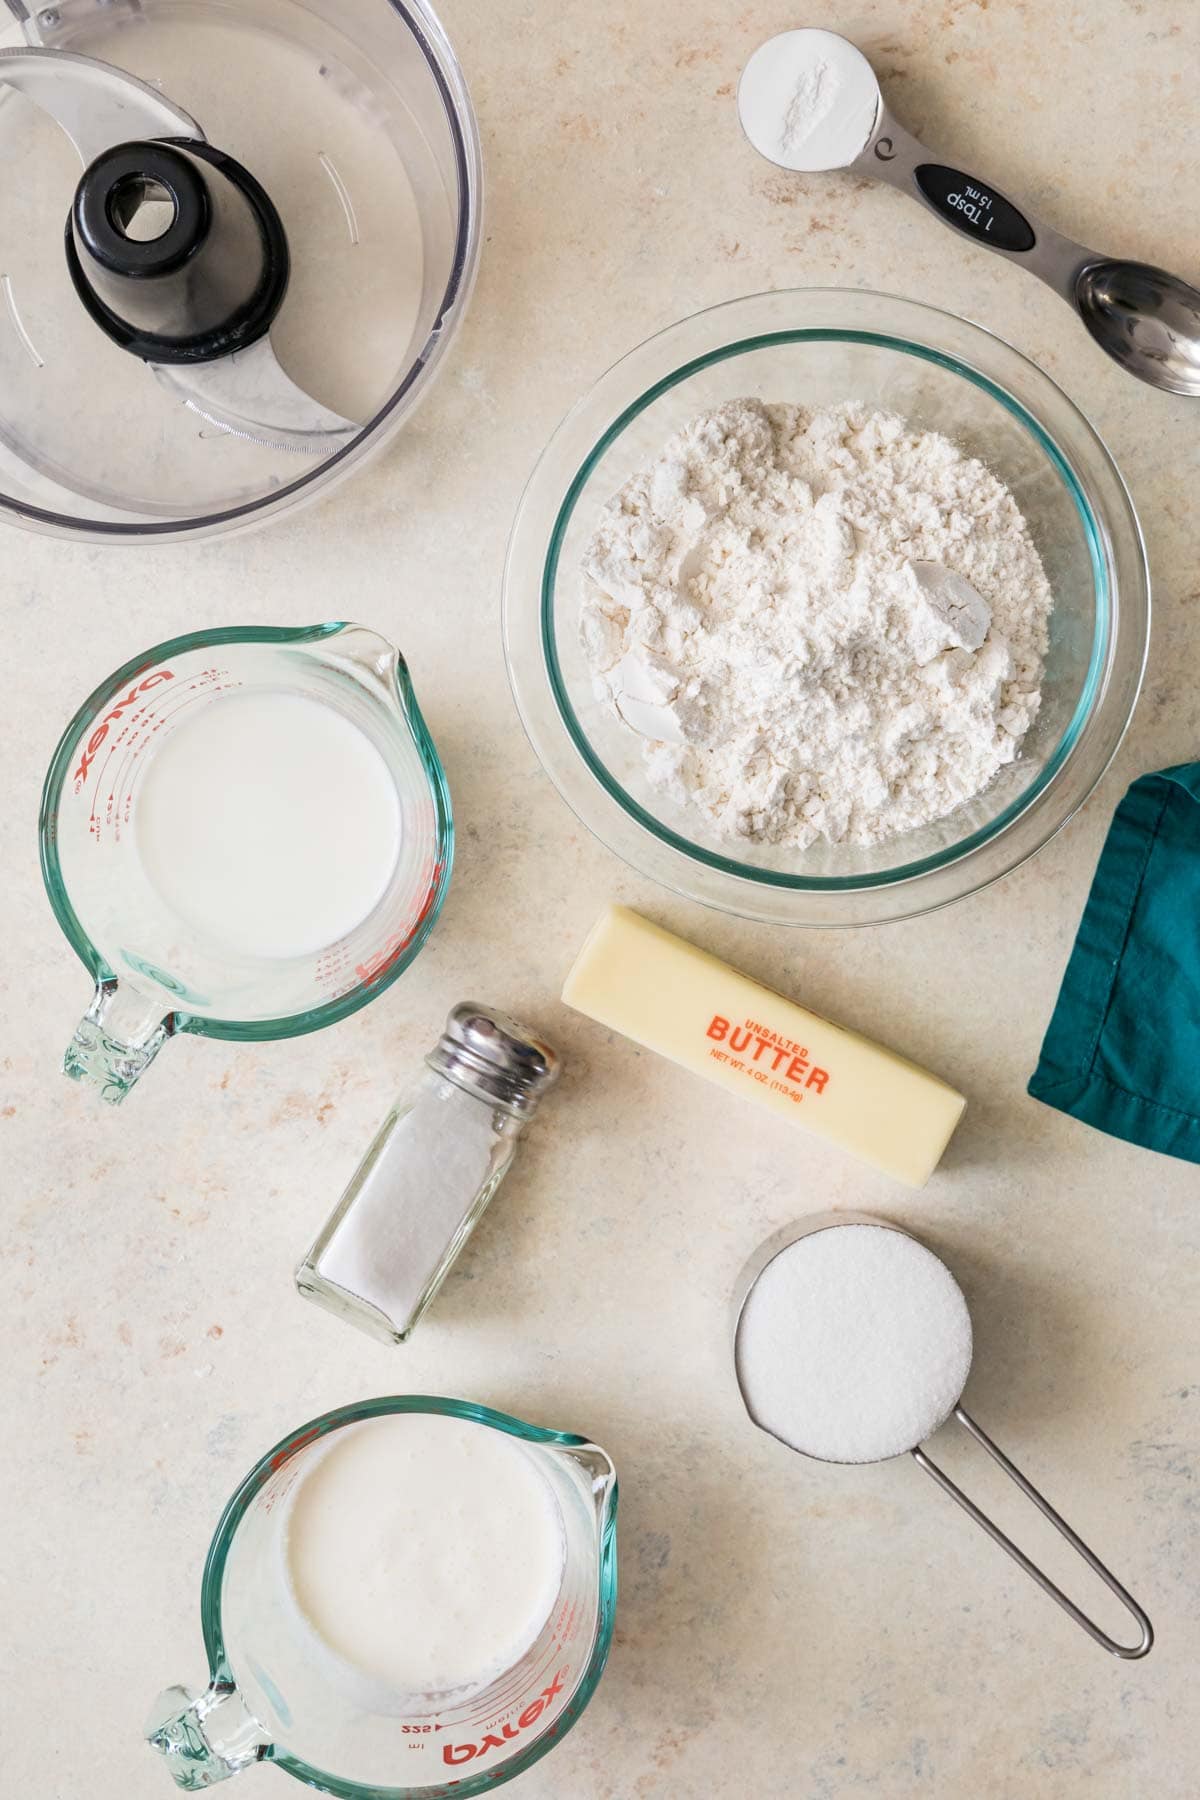 overhead view of ingredients including flour, sugar, butter, and more